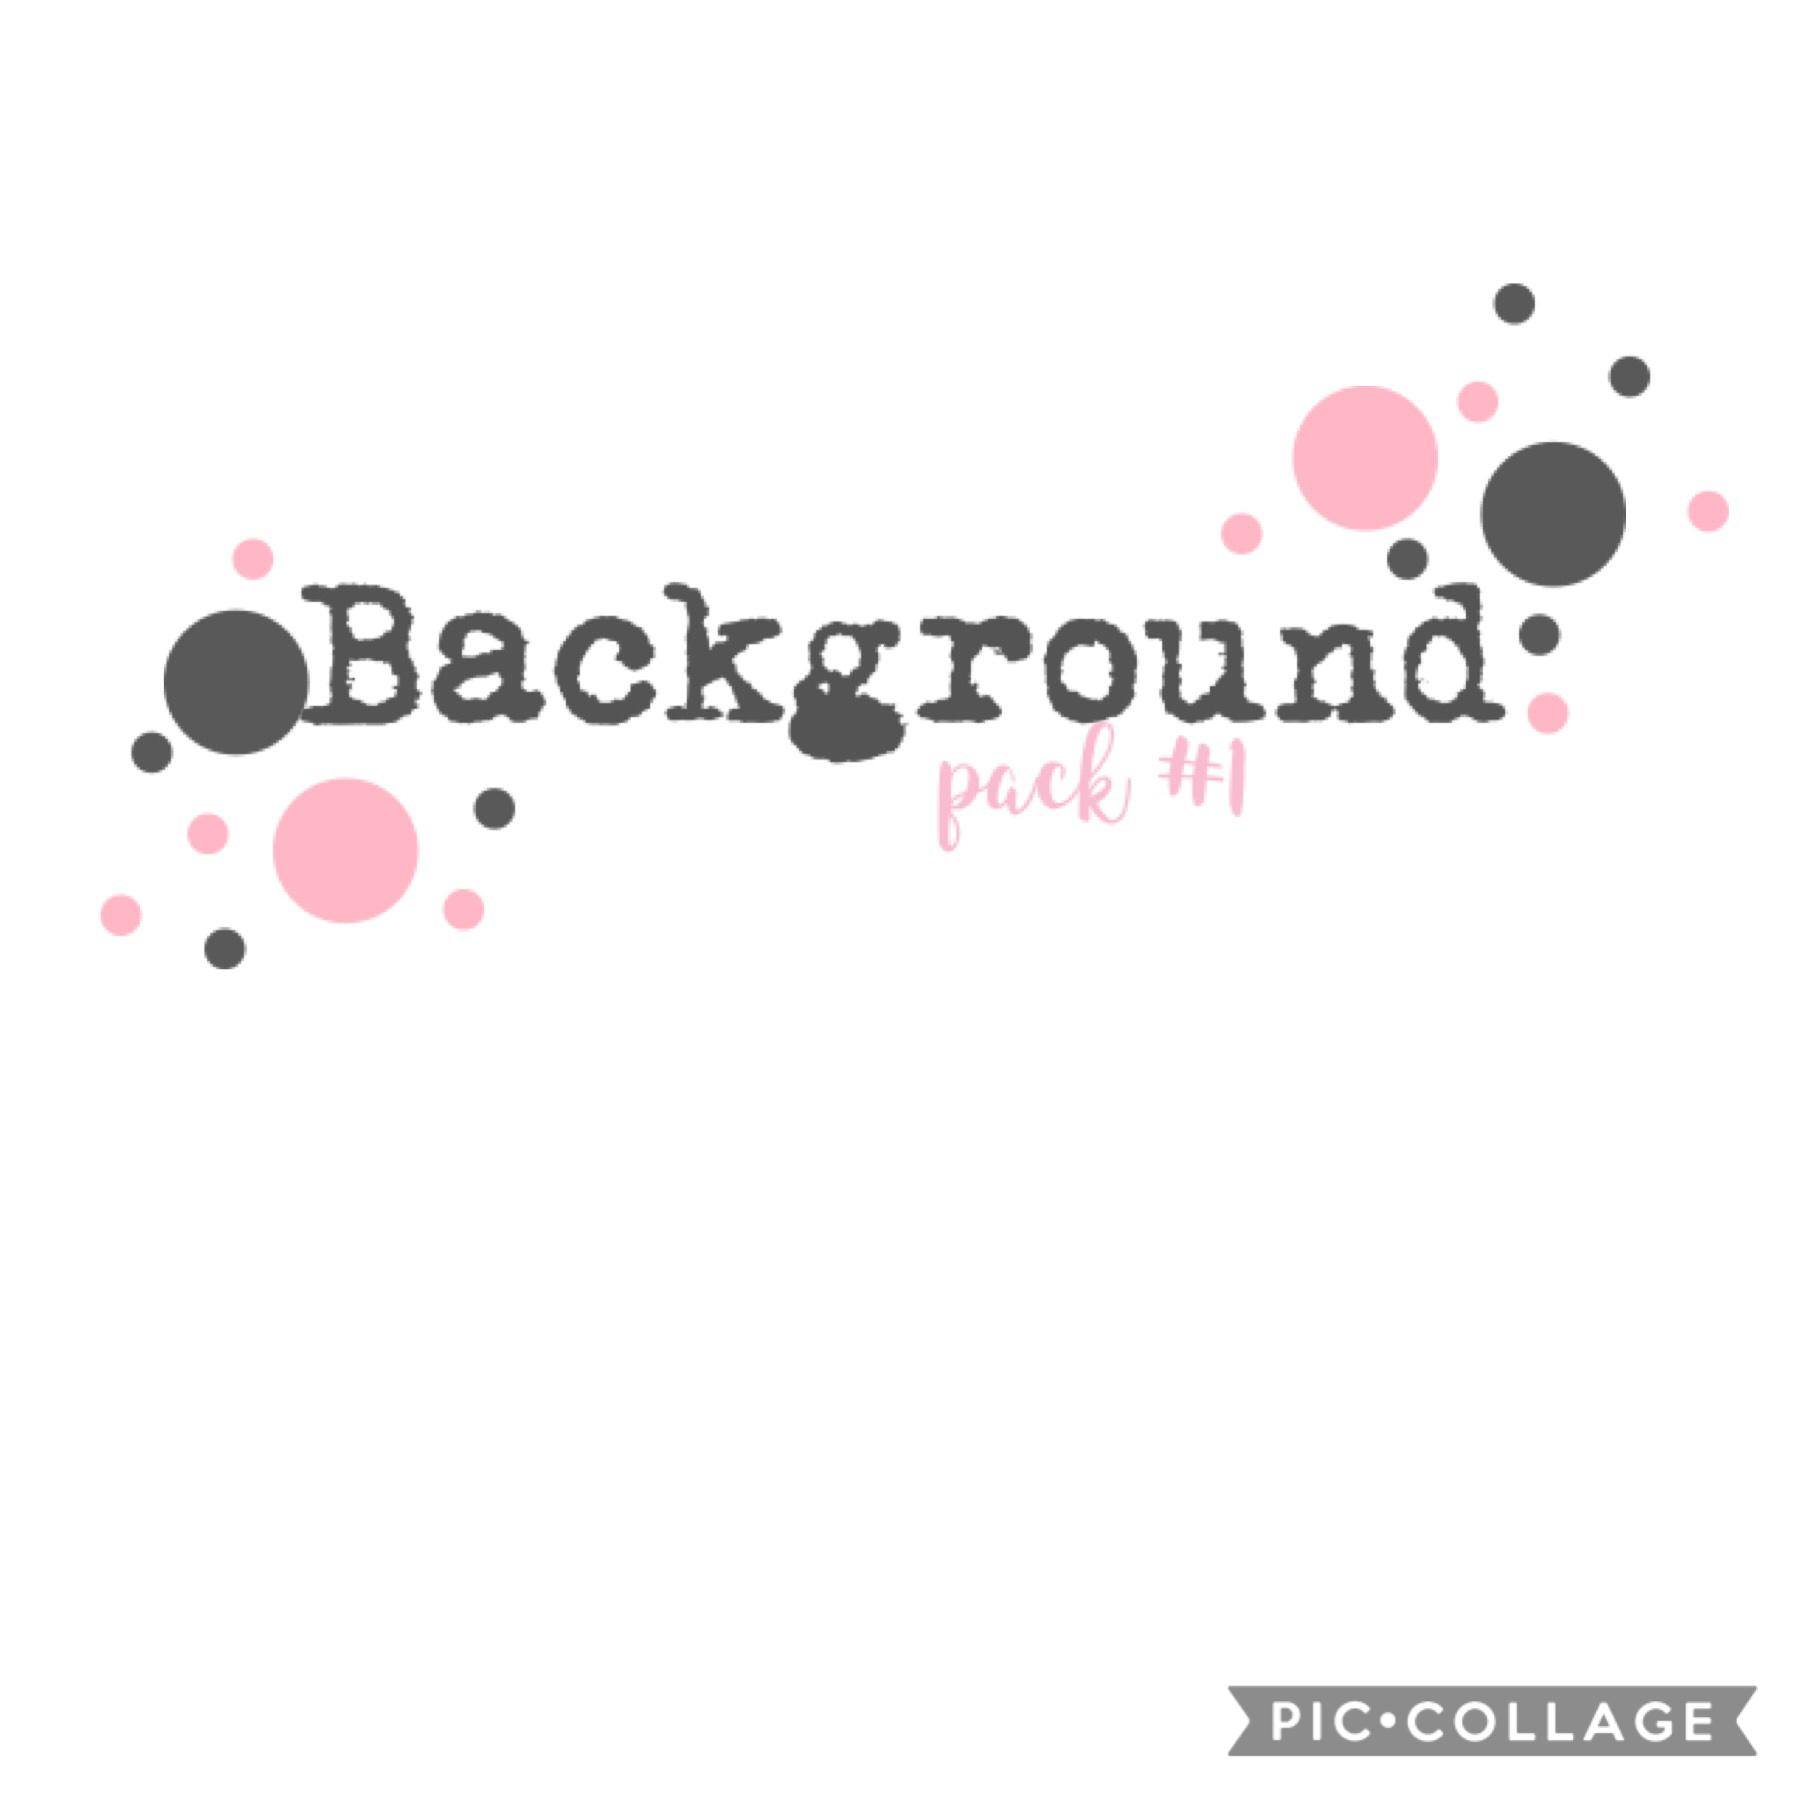 Background pack #1! Tap!
Tumblr Girl themed background pack in remixes. Please give credit if used! Review form out soon!